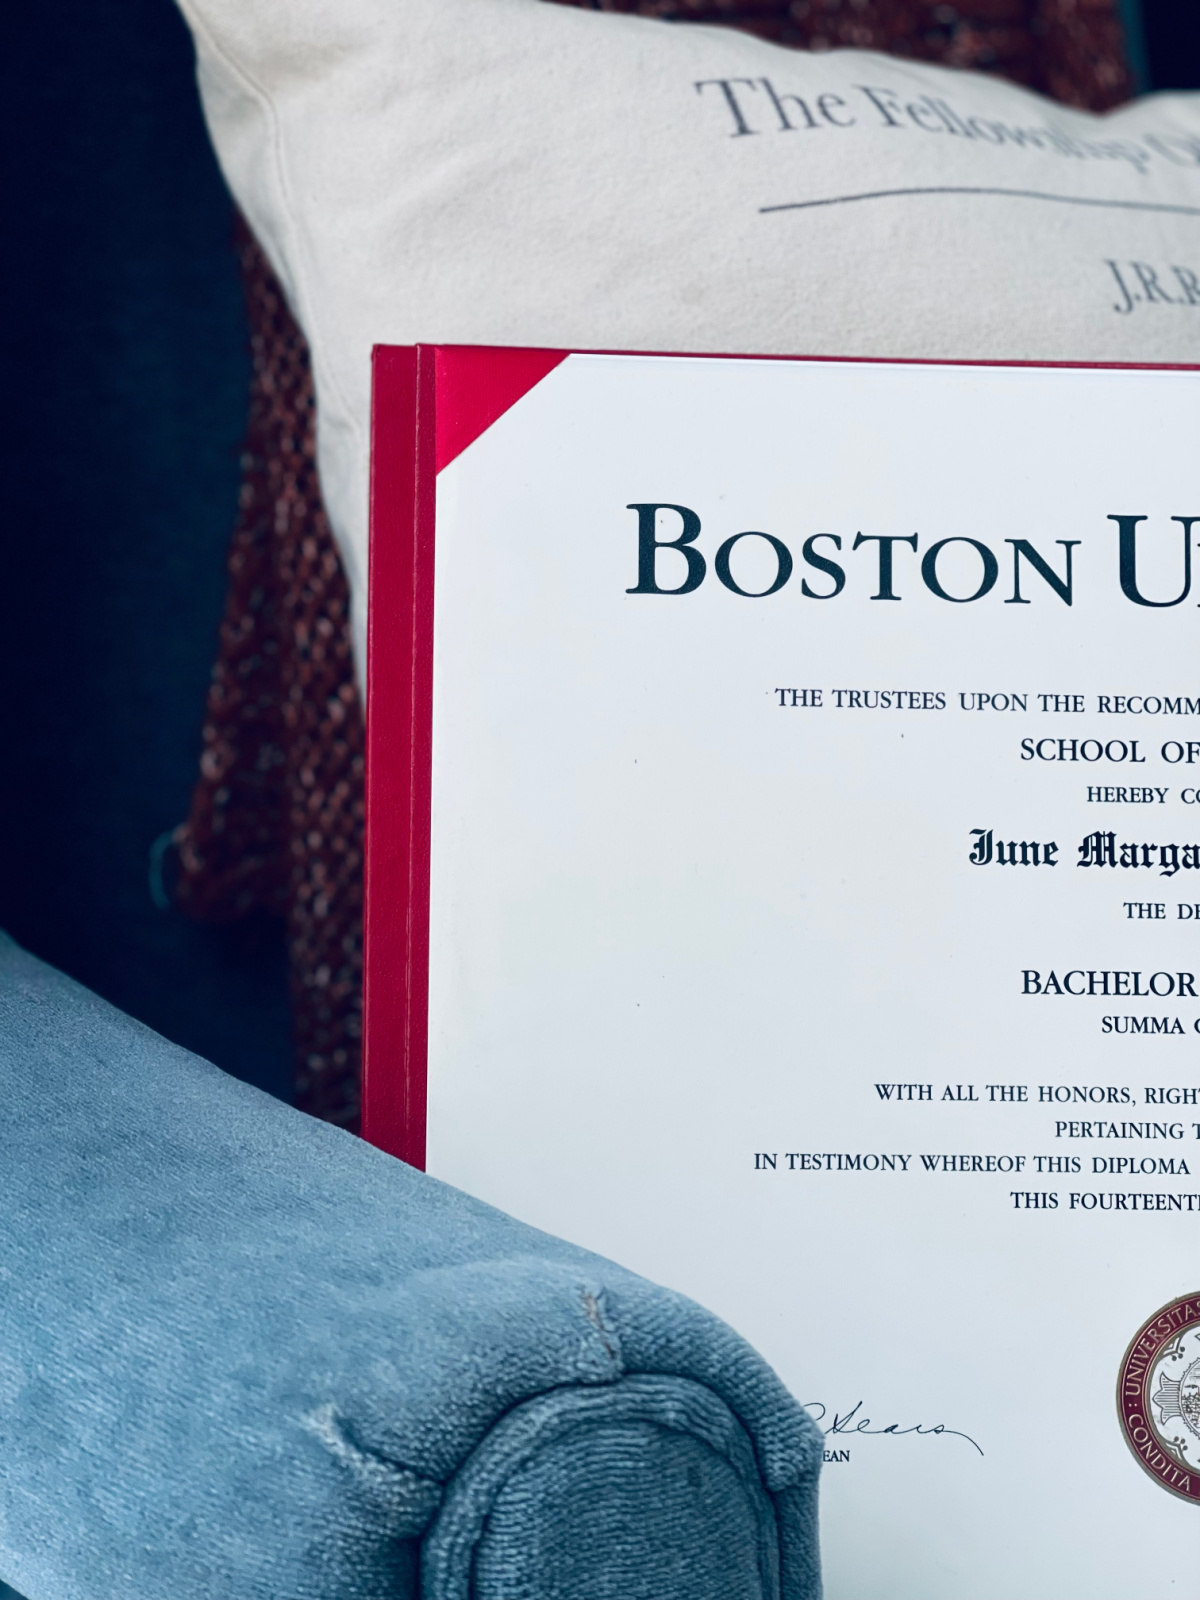 Half of a college diploma from Boston University